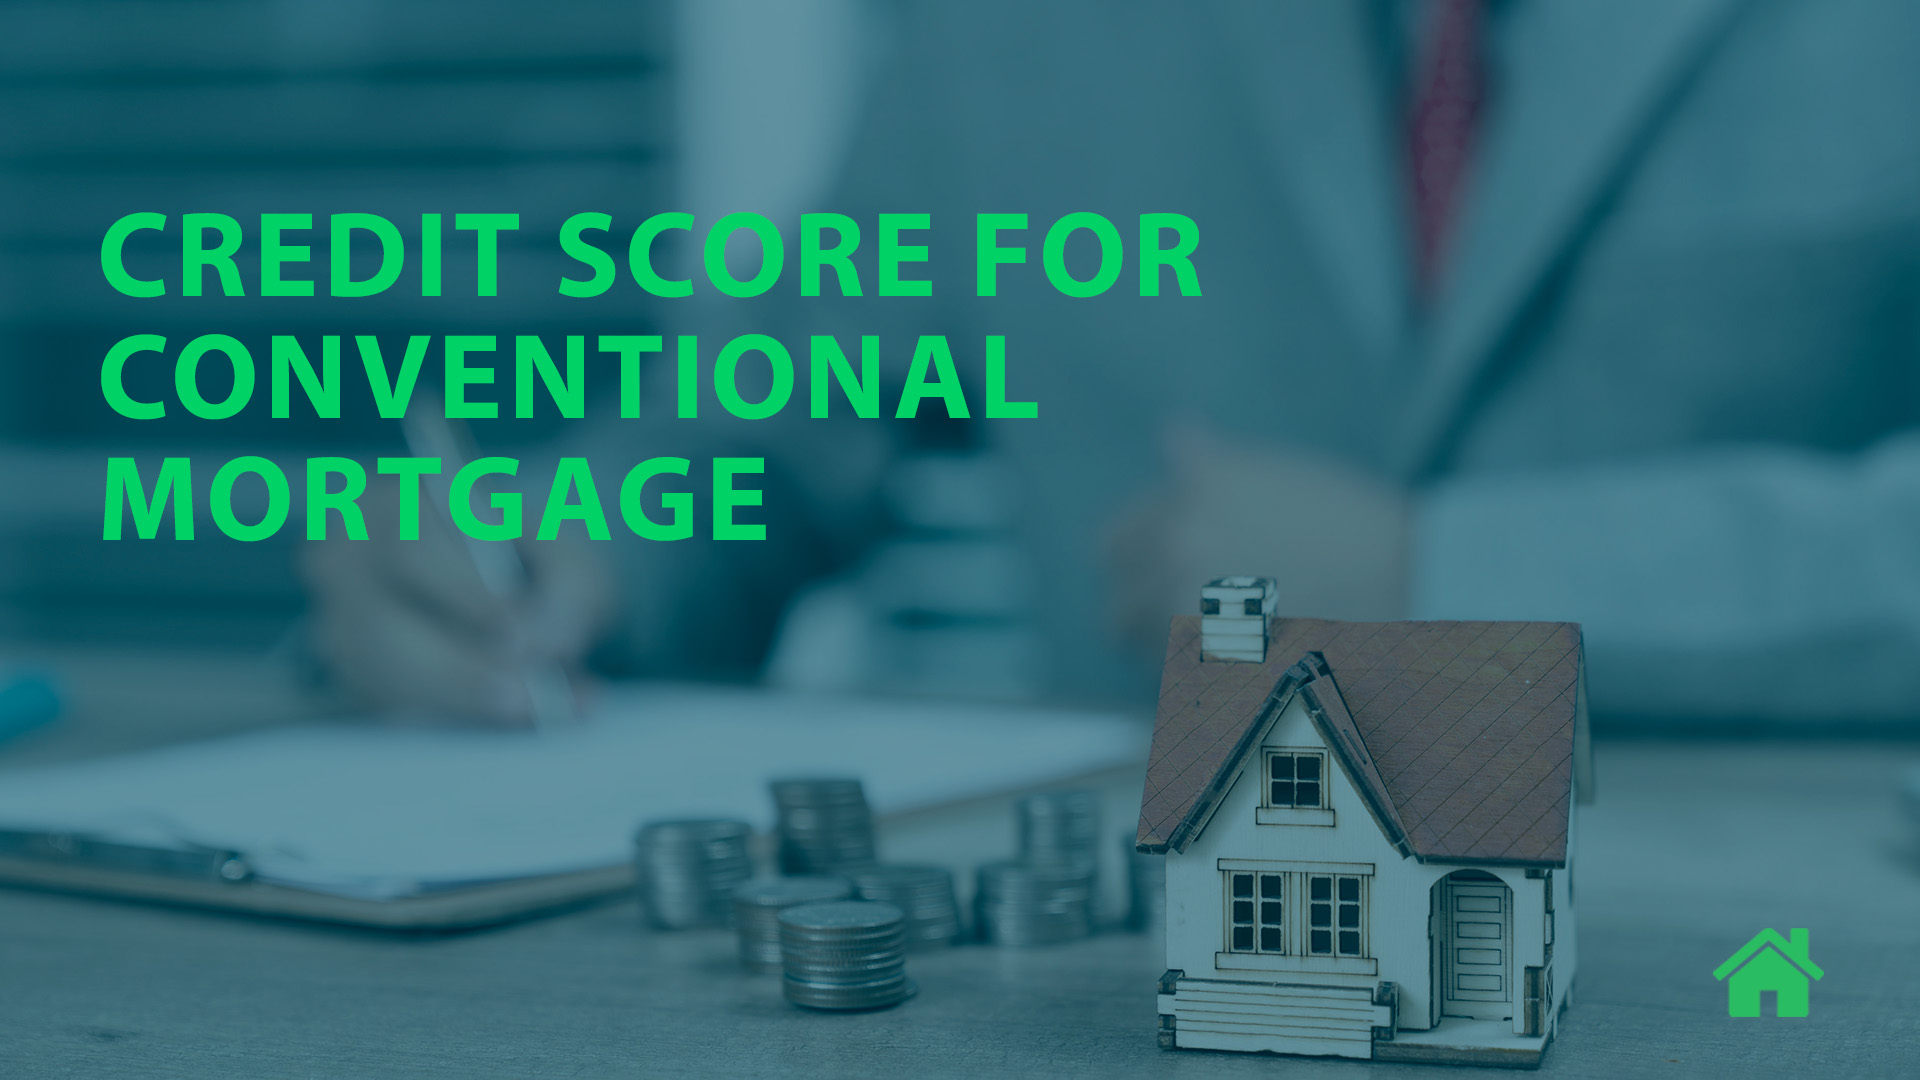 Credit score for conventional mortgage